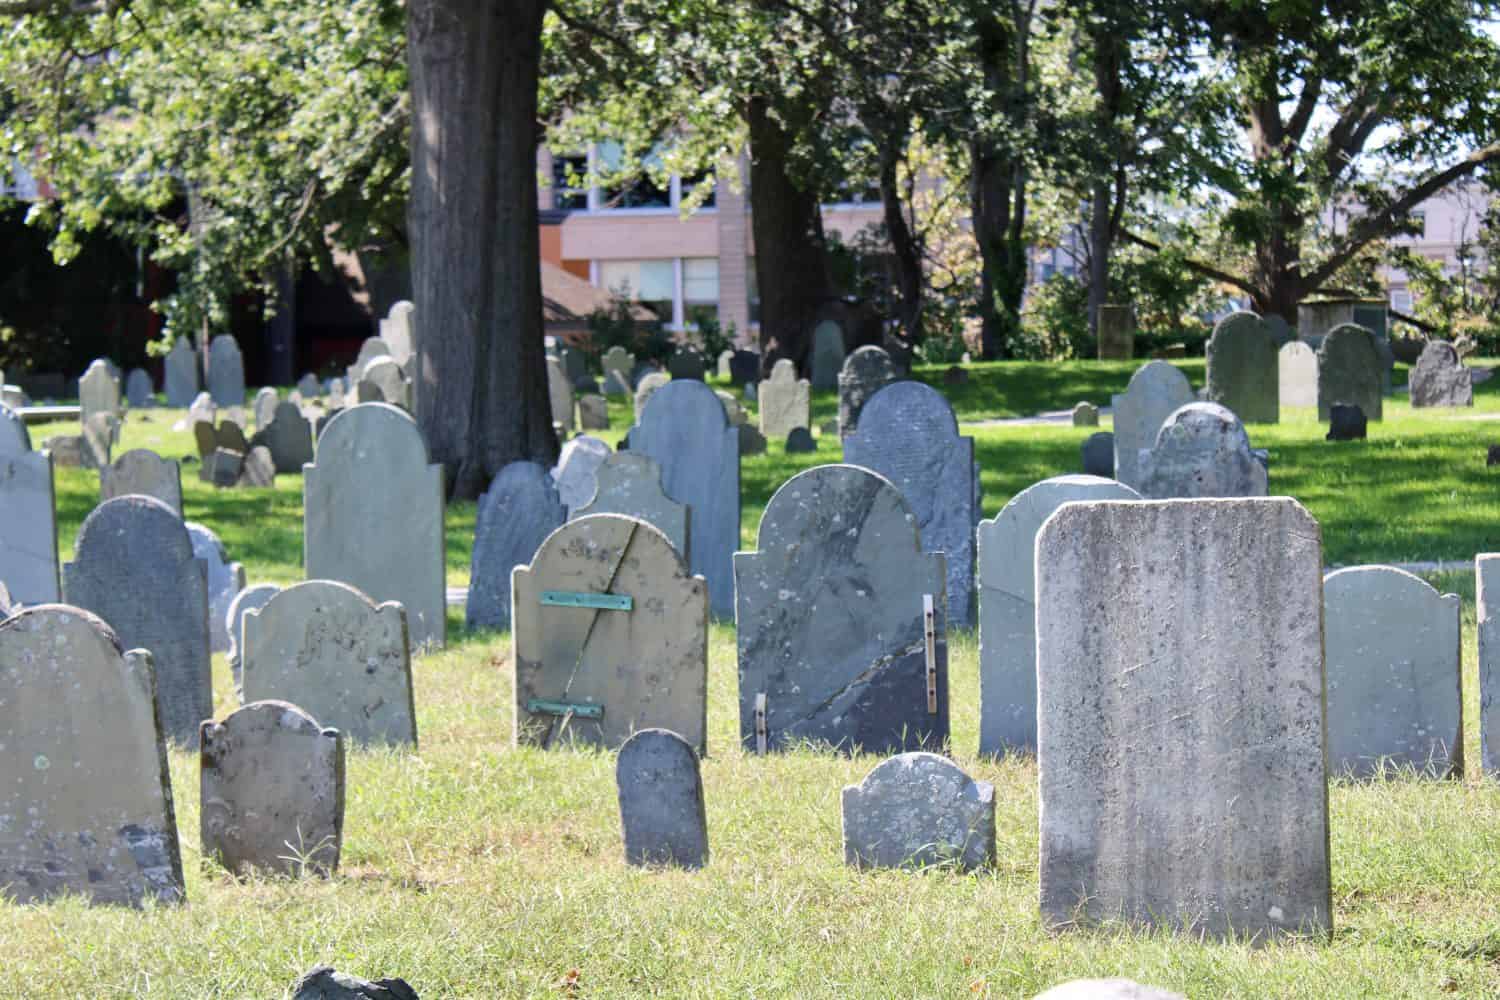 Historic headstones that are so old that they do not have recognizable engravings. These historical graves date back to 1637 and have many direct relations to the Salem Witch Trials.